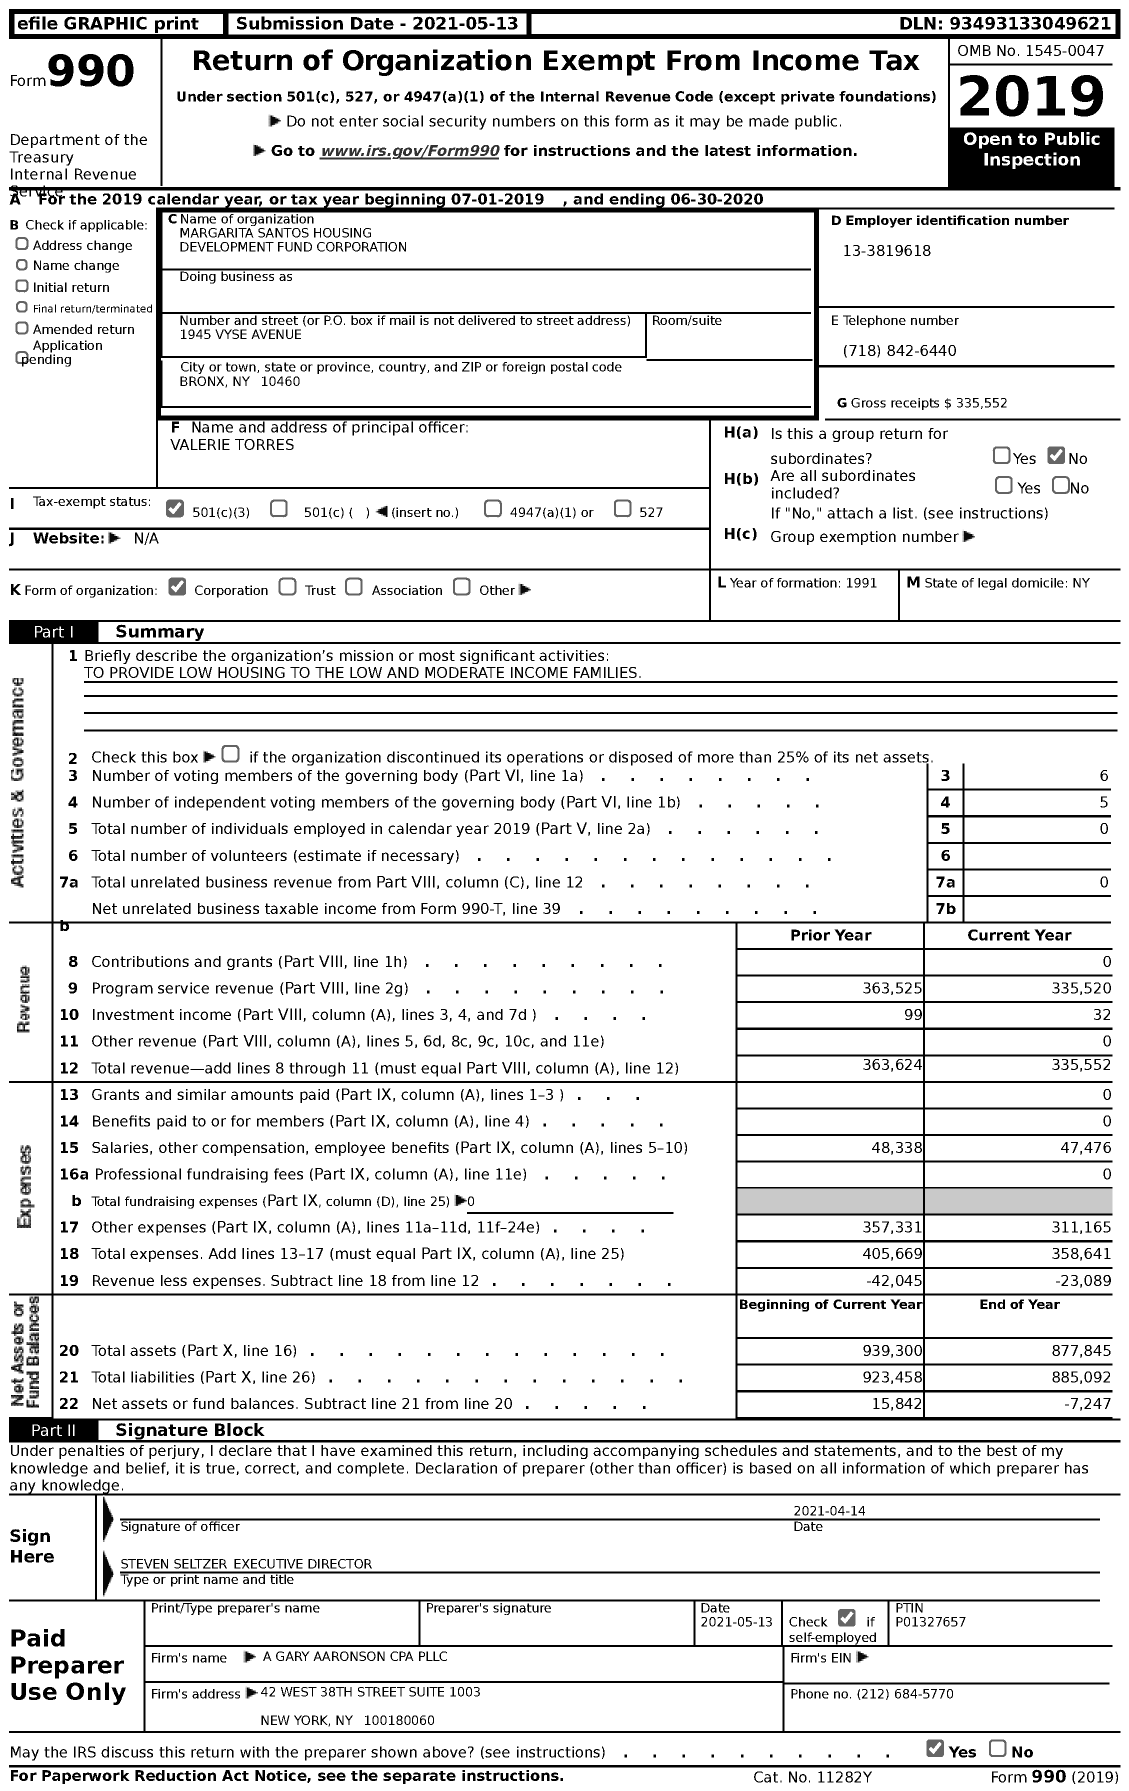 Image of first page of 2019 Form 990 for Margarita Santos Housing Development Fund Corporation